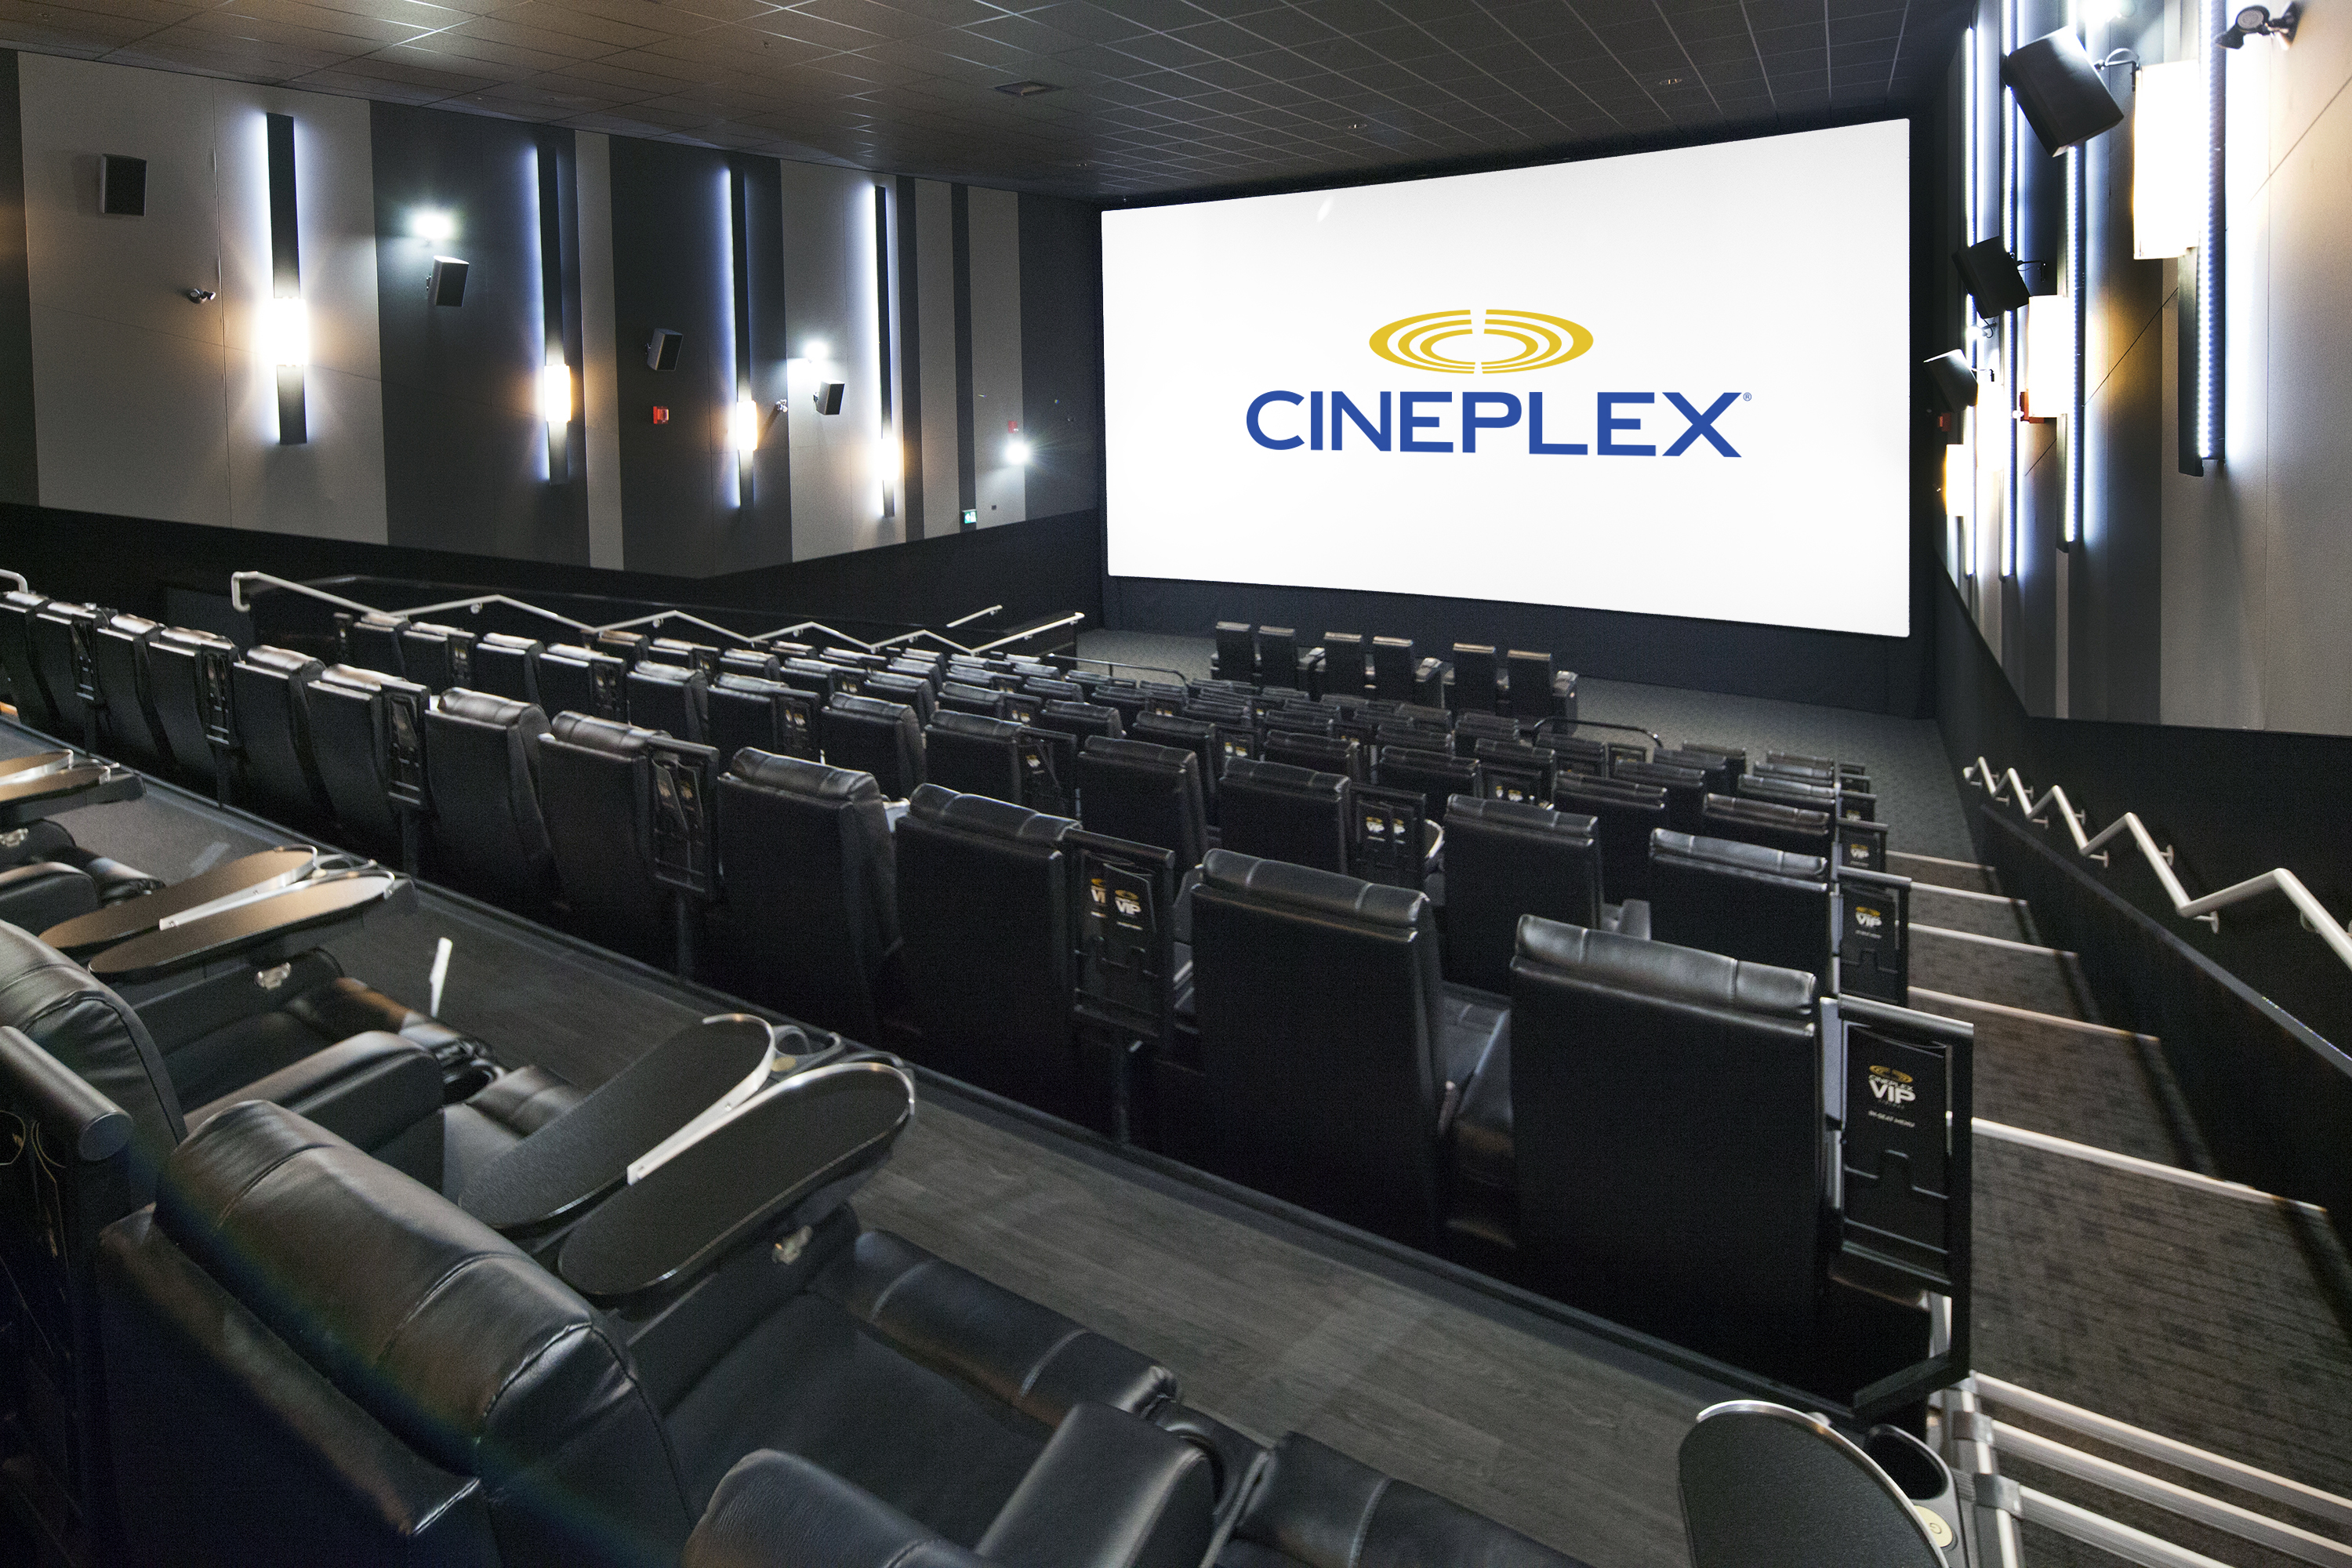 Left in Netflix’s (NASDAQ:NFLX) Dust? Think Again! Why Cineplex (TSX:CGX) Is Poised for Growth